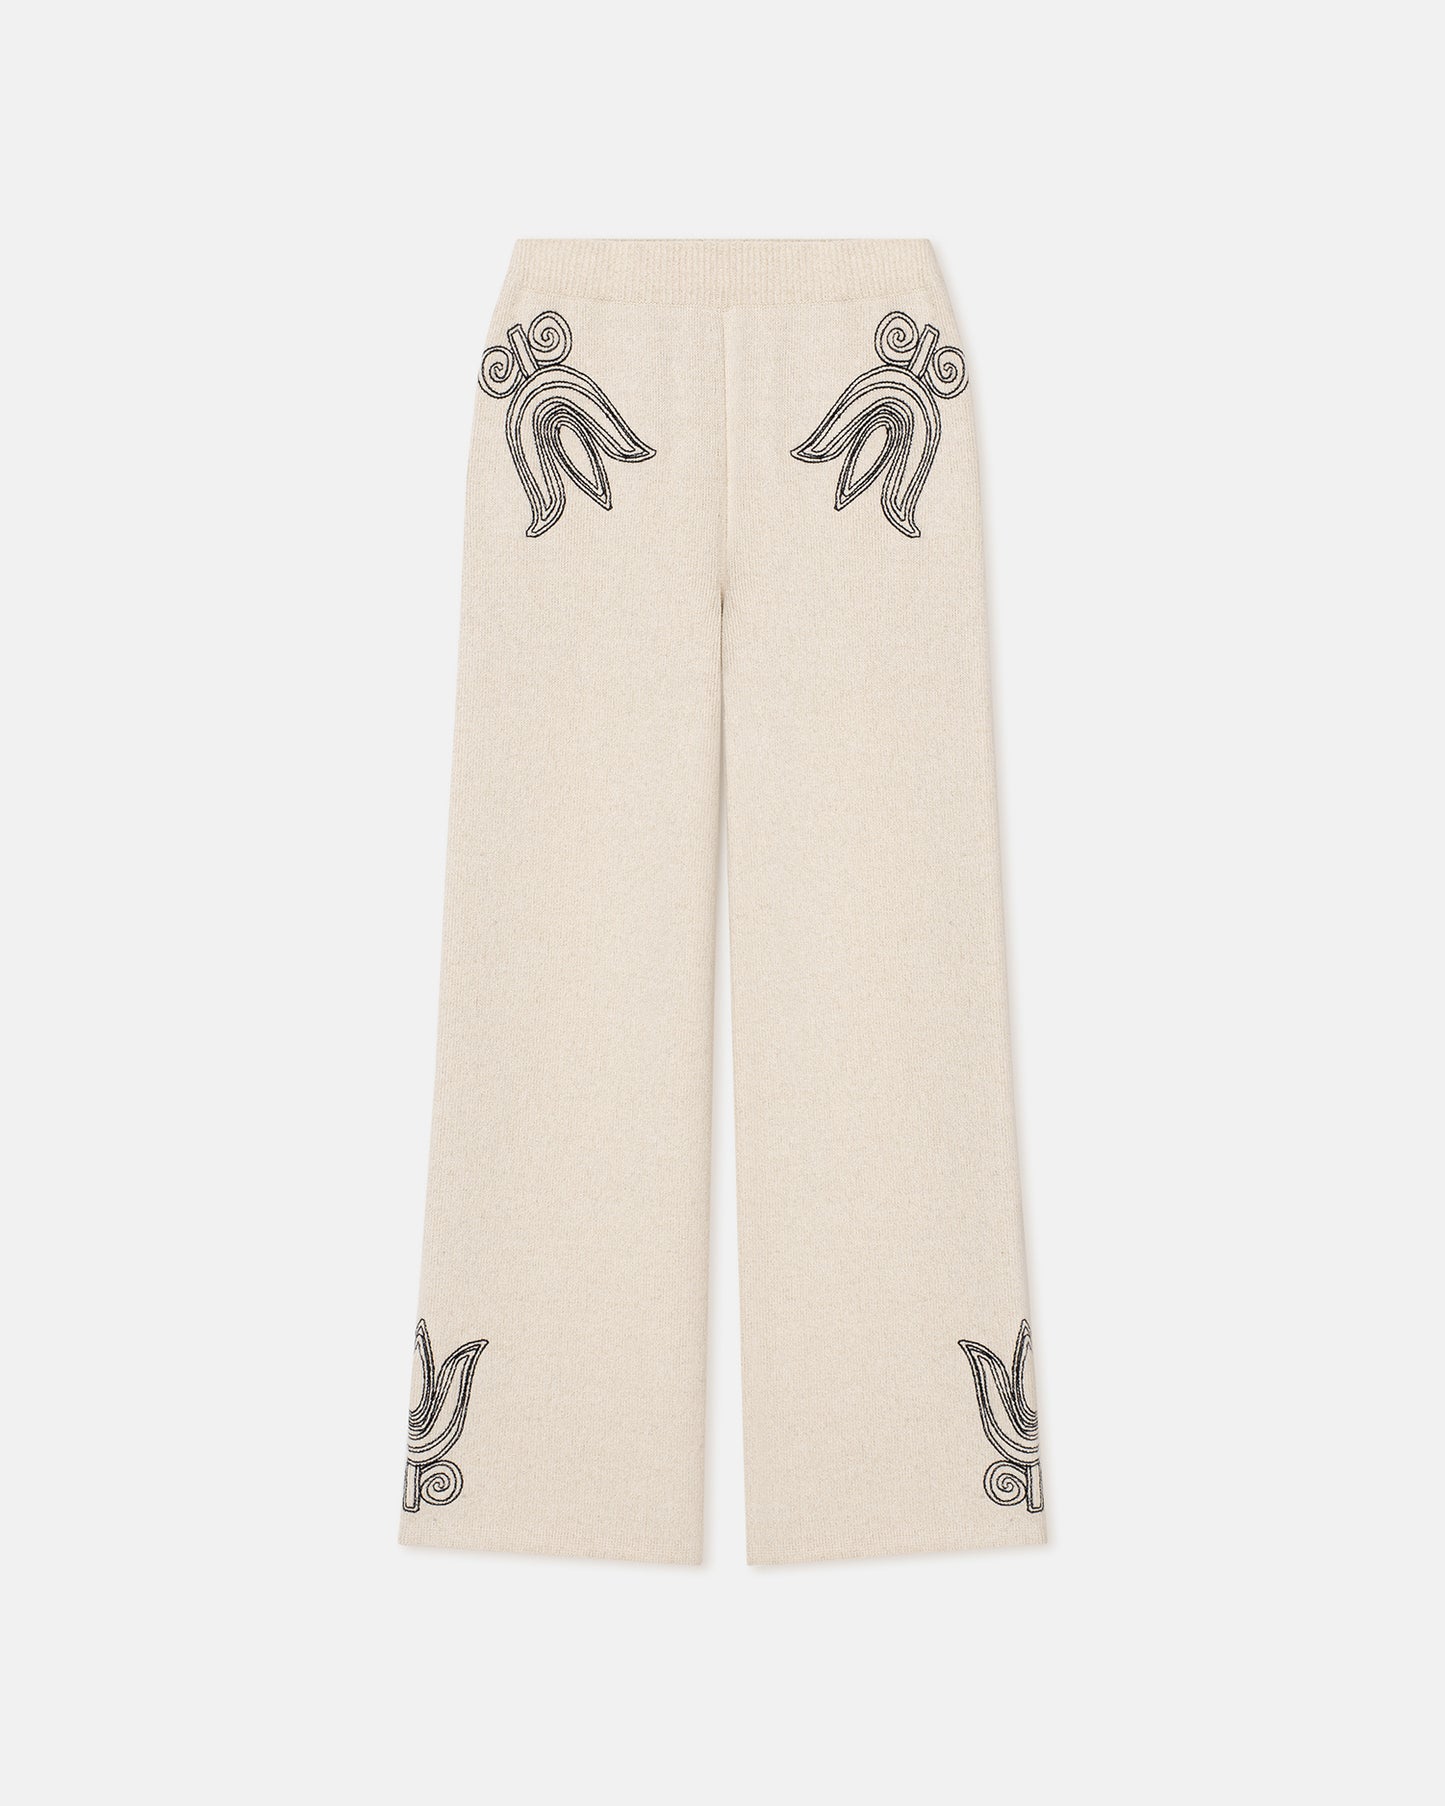 Emmie - Embroidered Textured-Linen Pants - Natural/Black